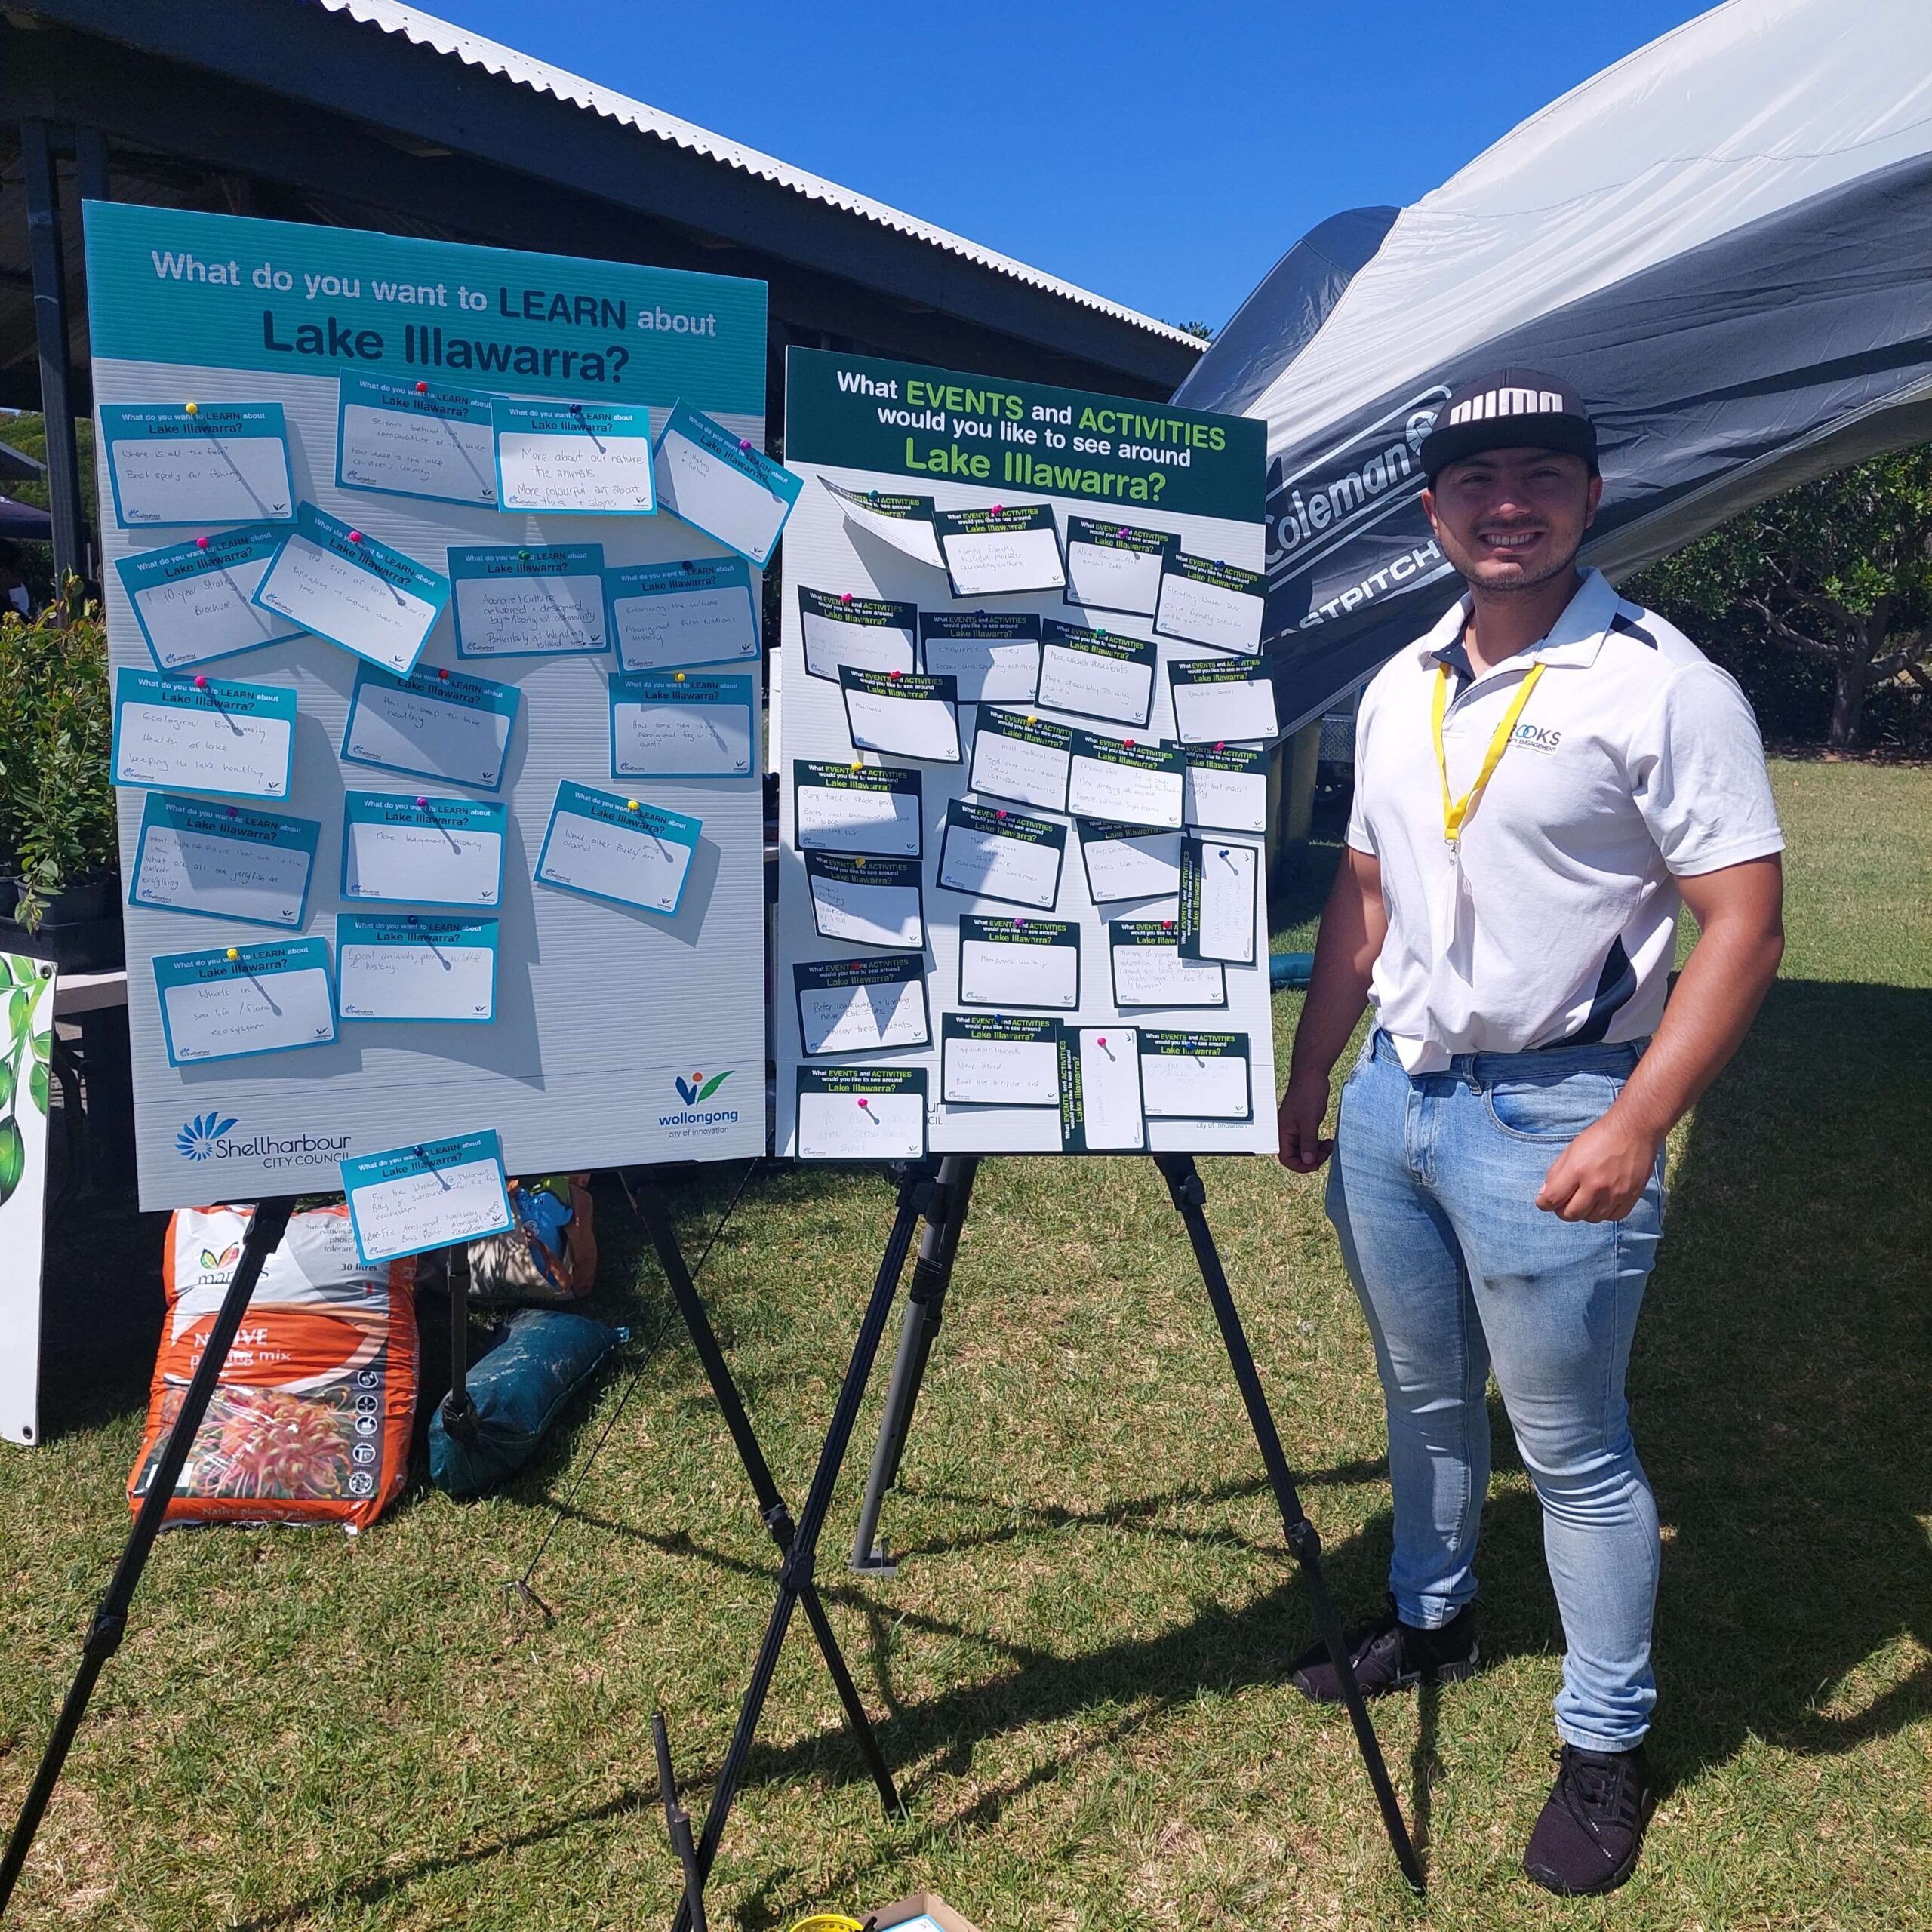 Community Engagement Officer at the Shellharbour Rock Festival